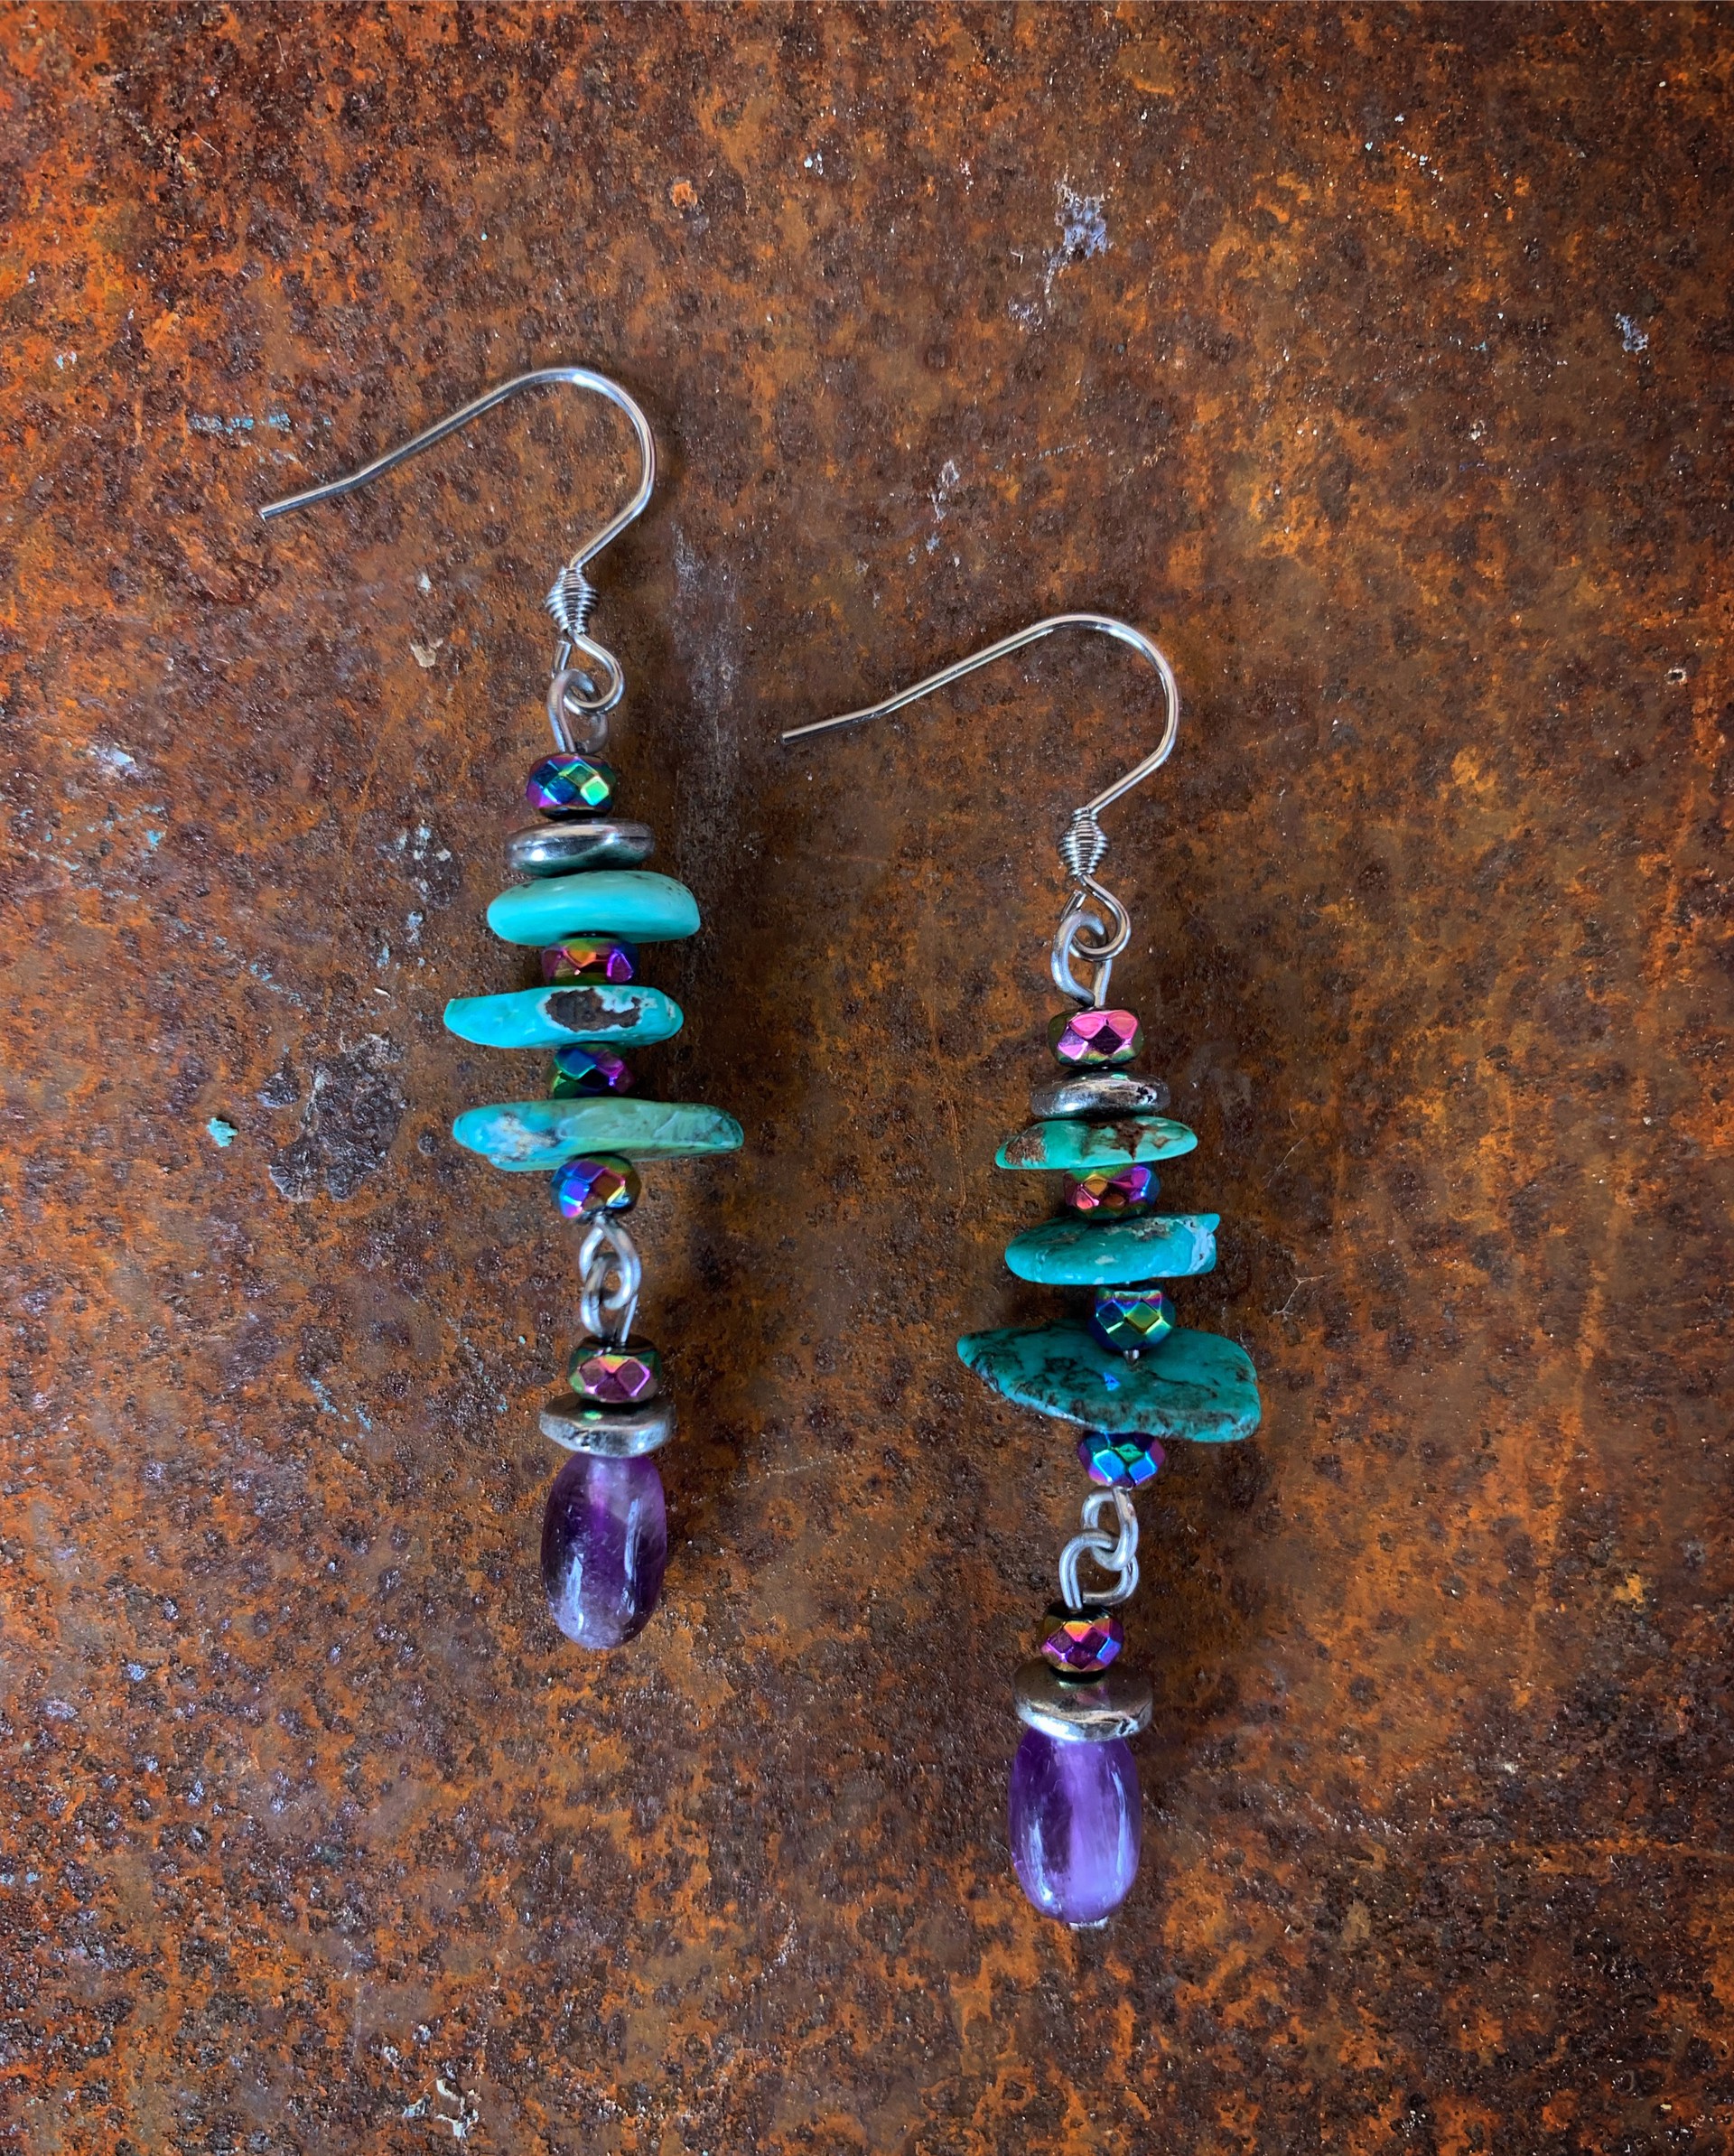 K759 Turquoise and Amethyst Earrings by Kelly Ormsby